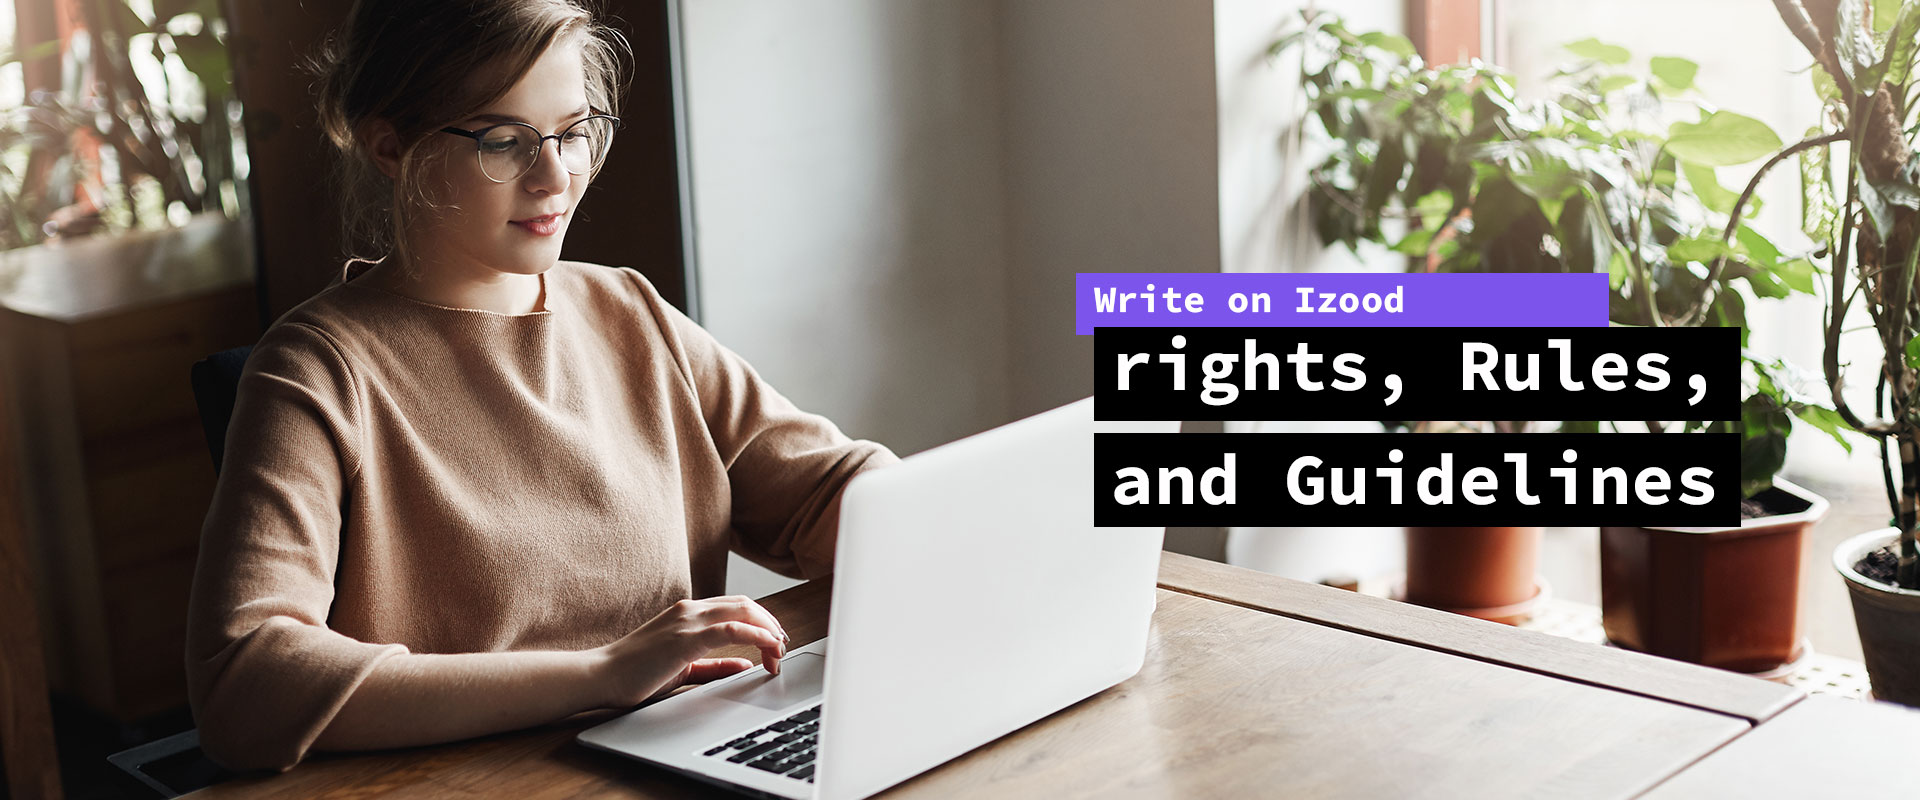 Izood Contributor’s rights, Rules, and Guidelines